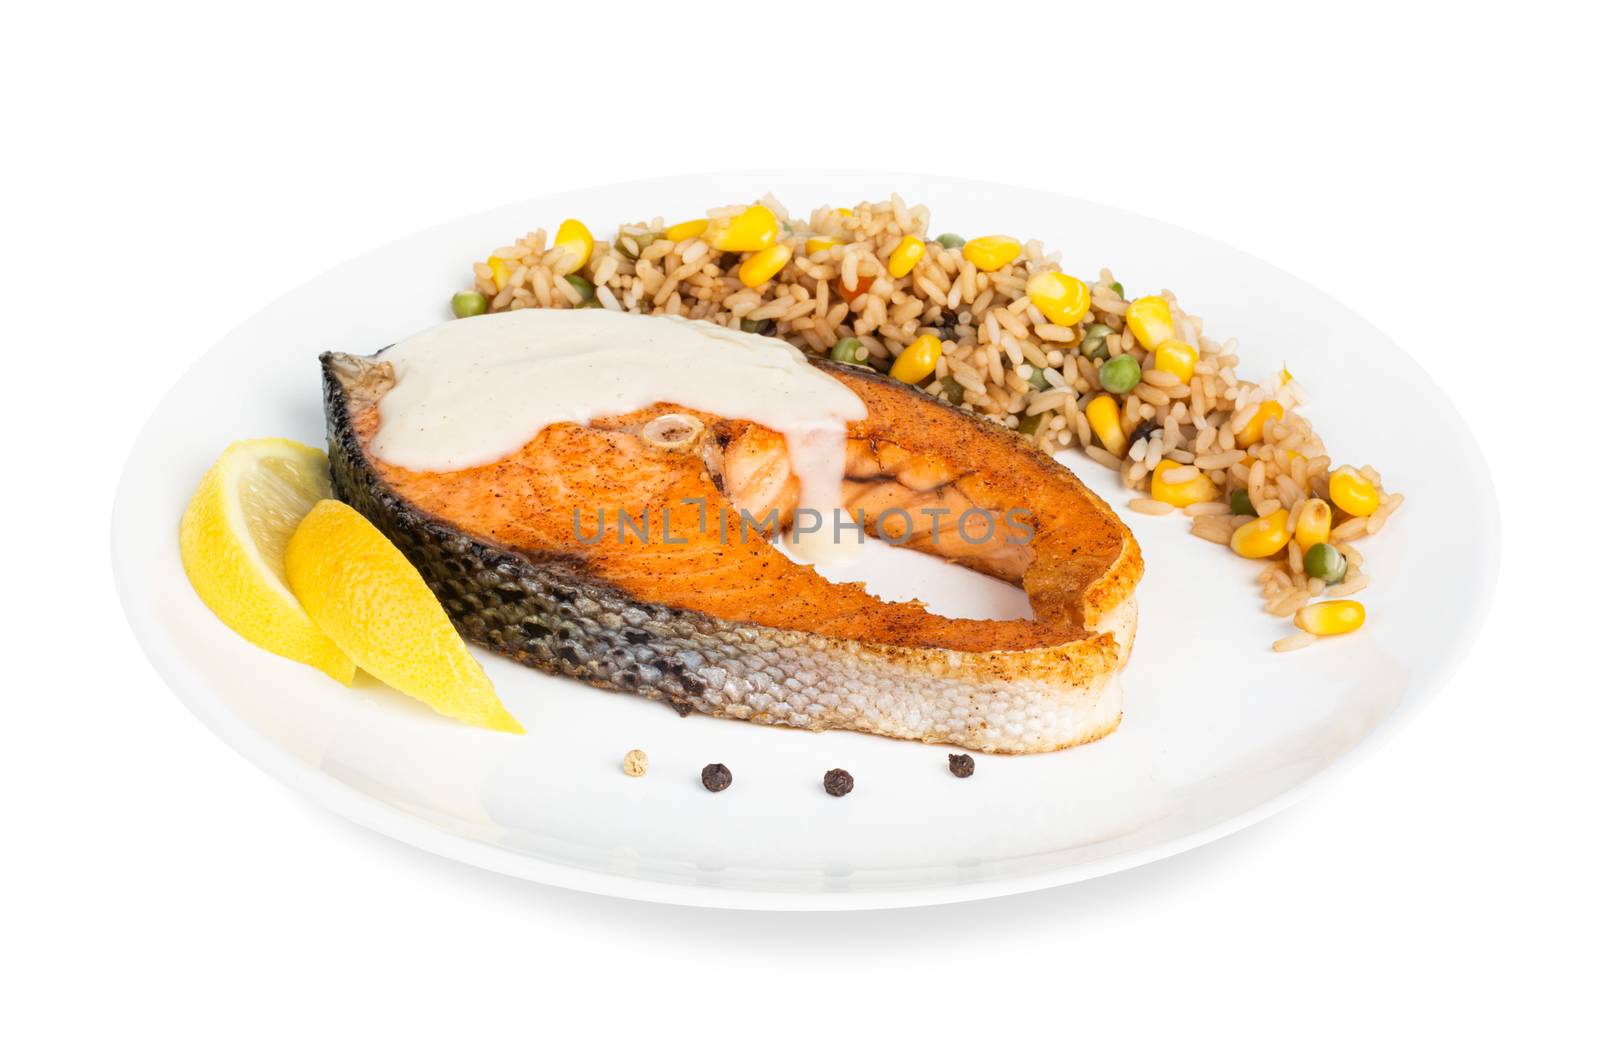 Fried cooked salmon with garnish of rice and vegetables on white plate isolated on white background